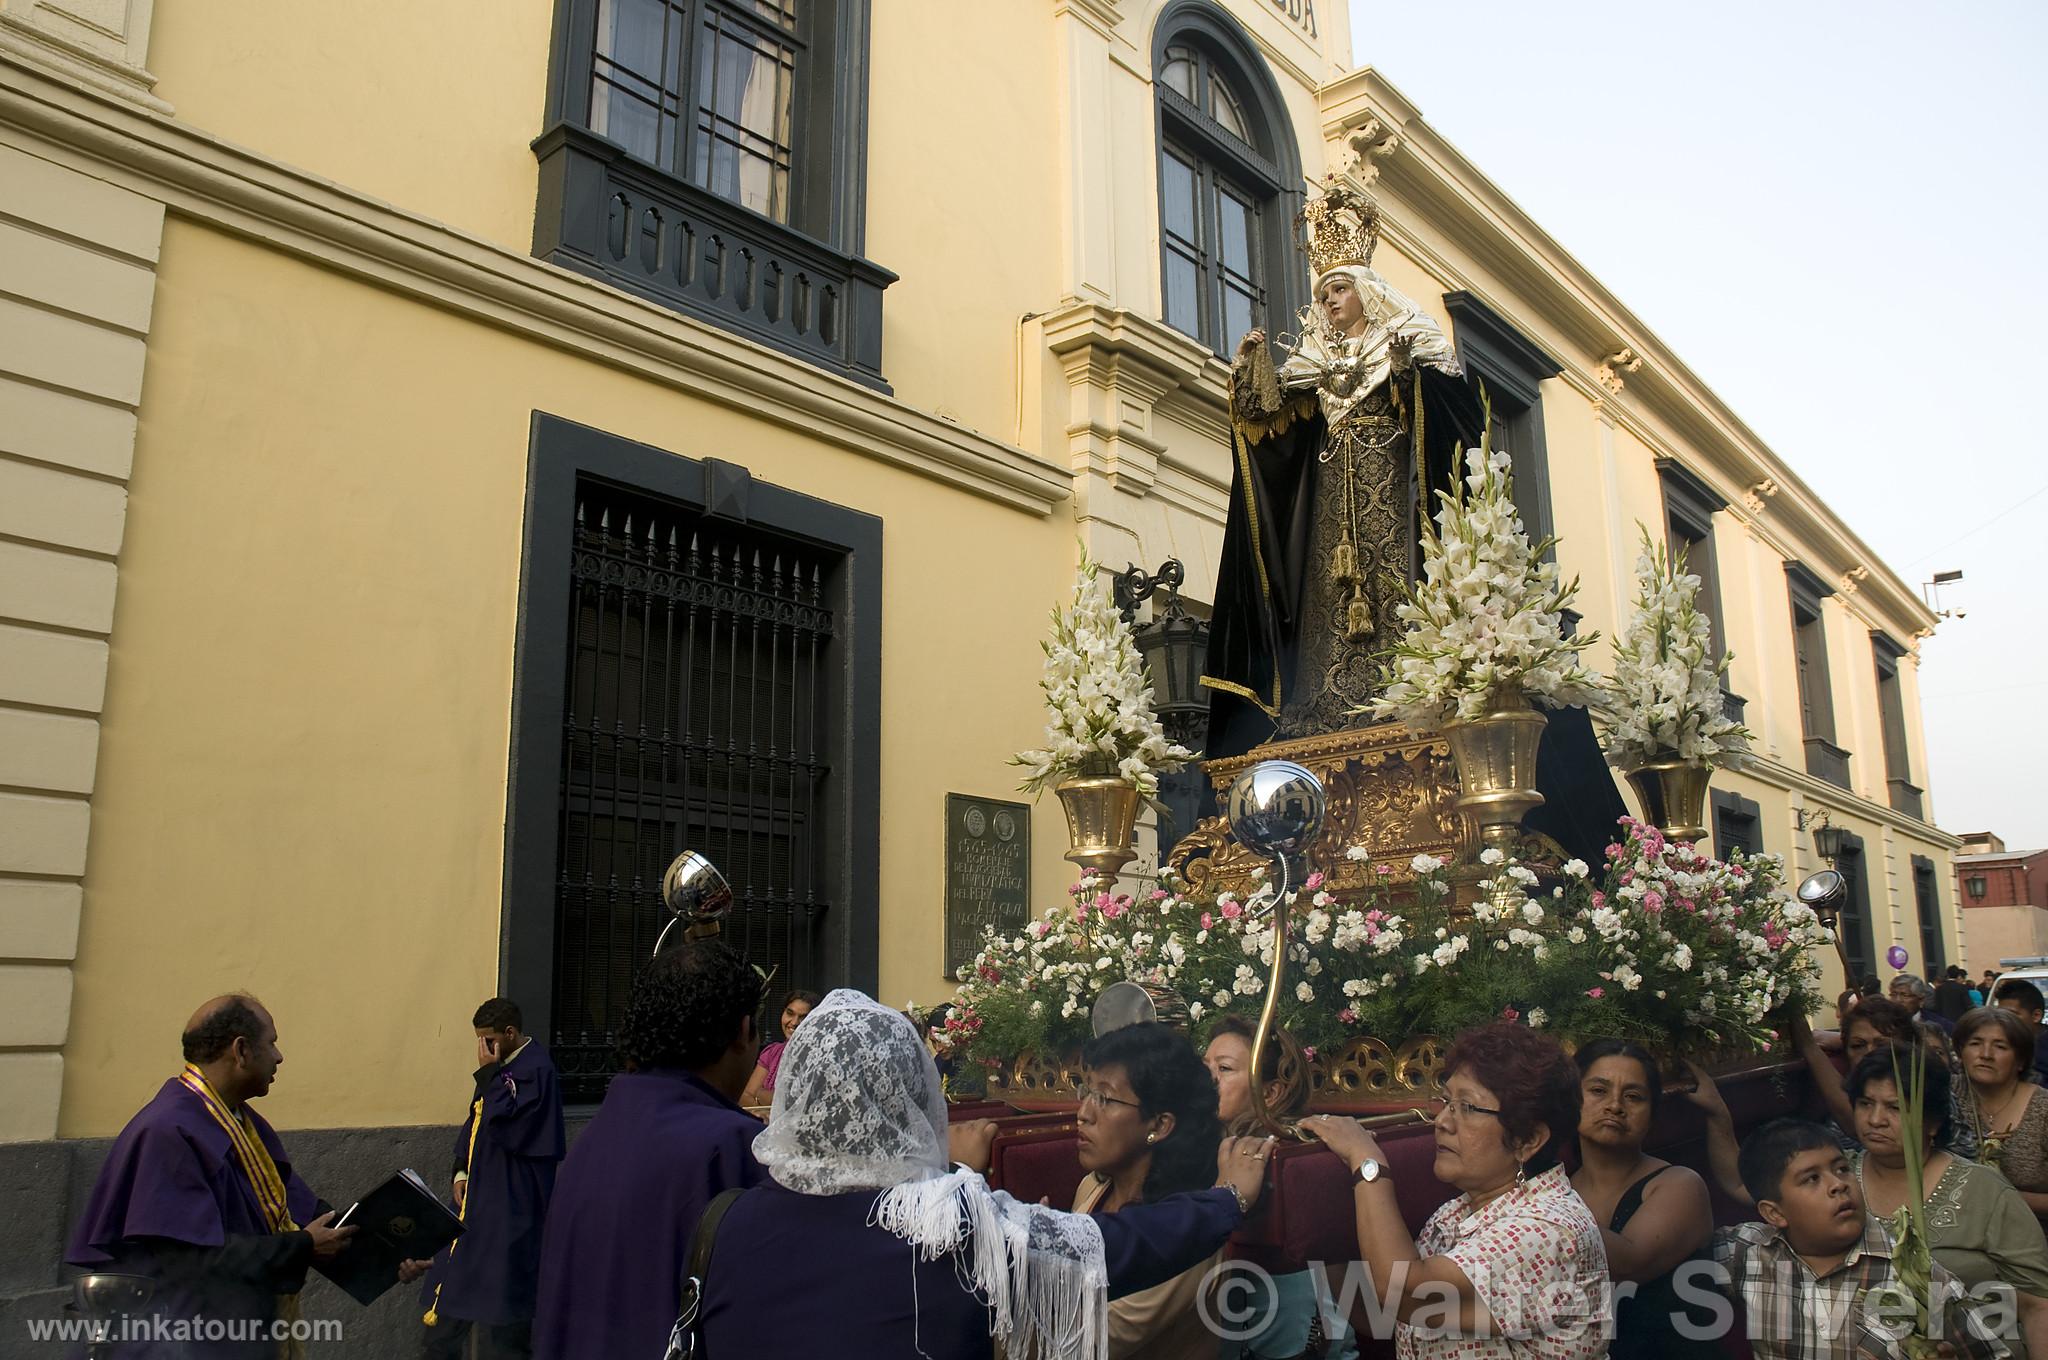 Easter in Lima